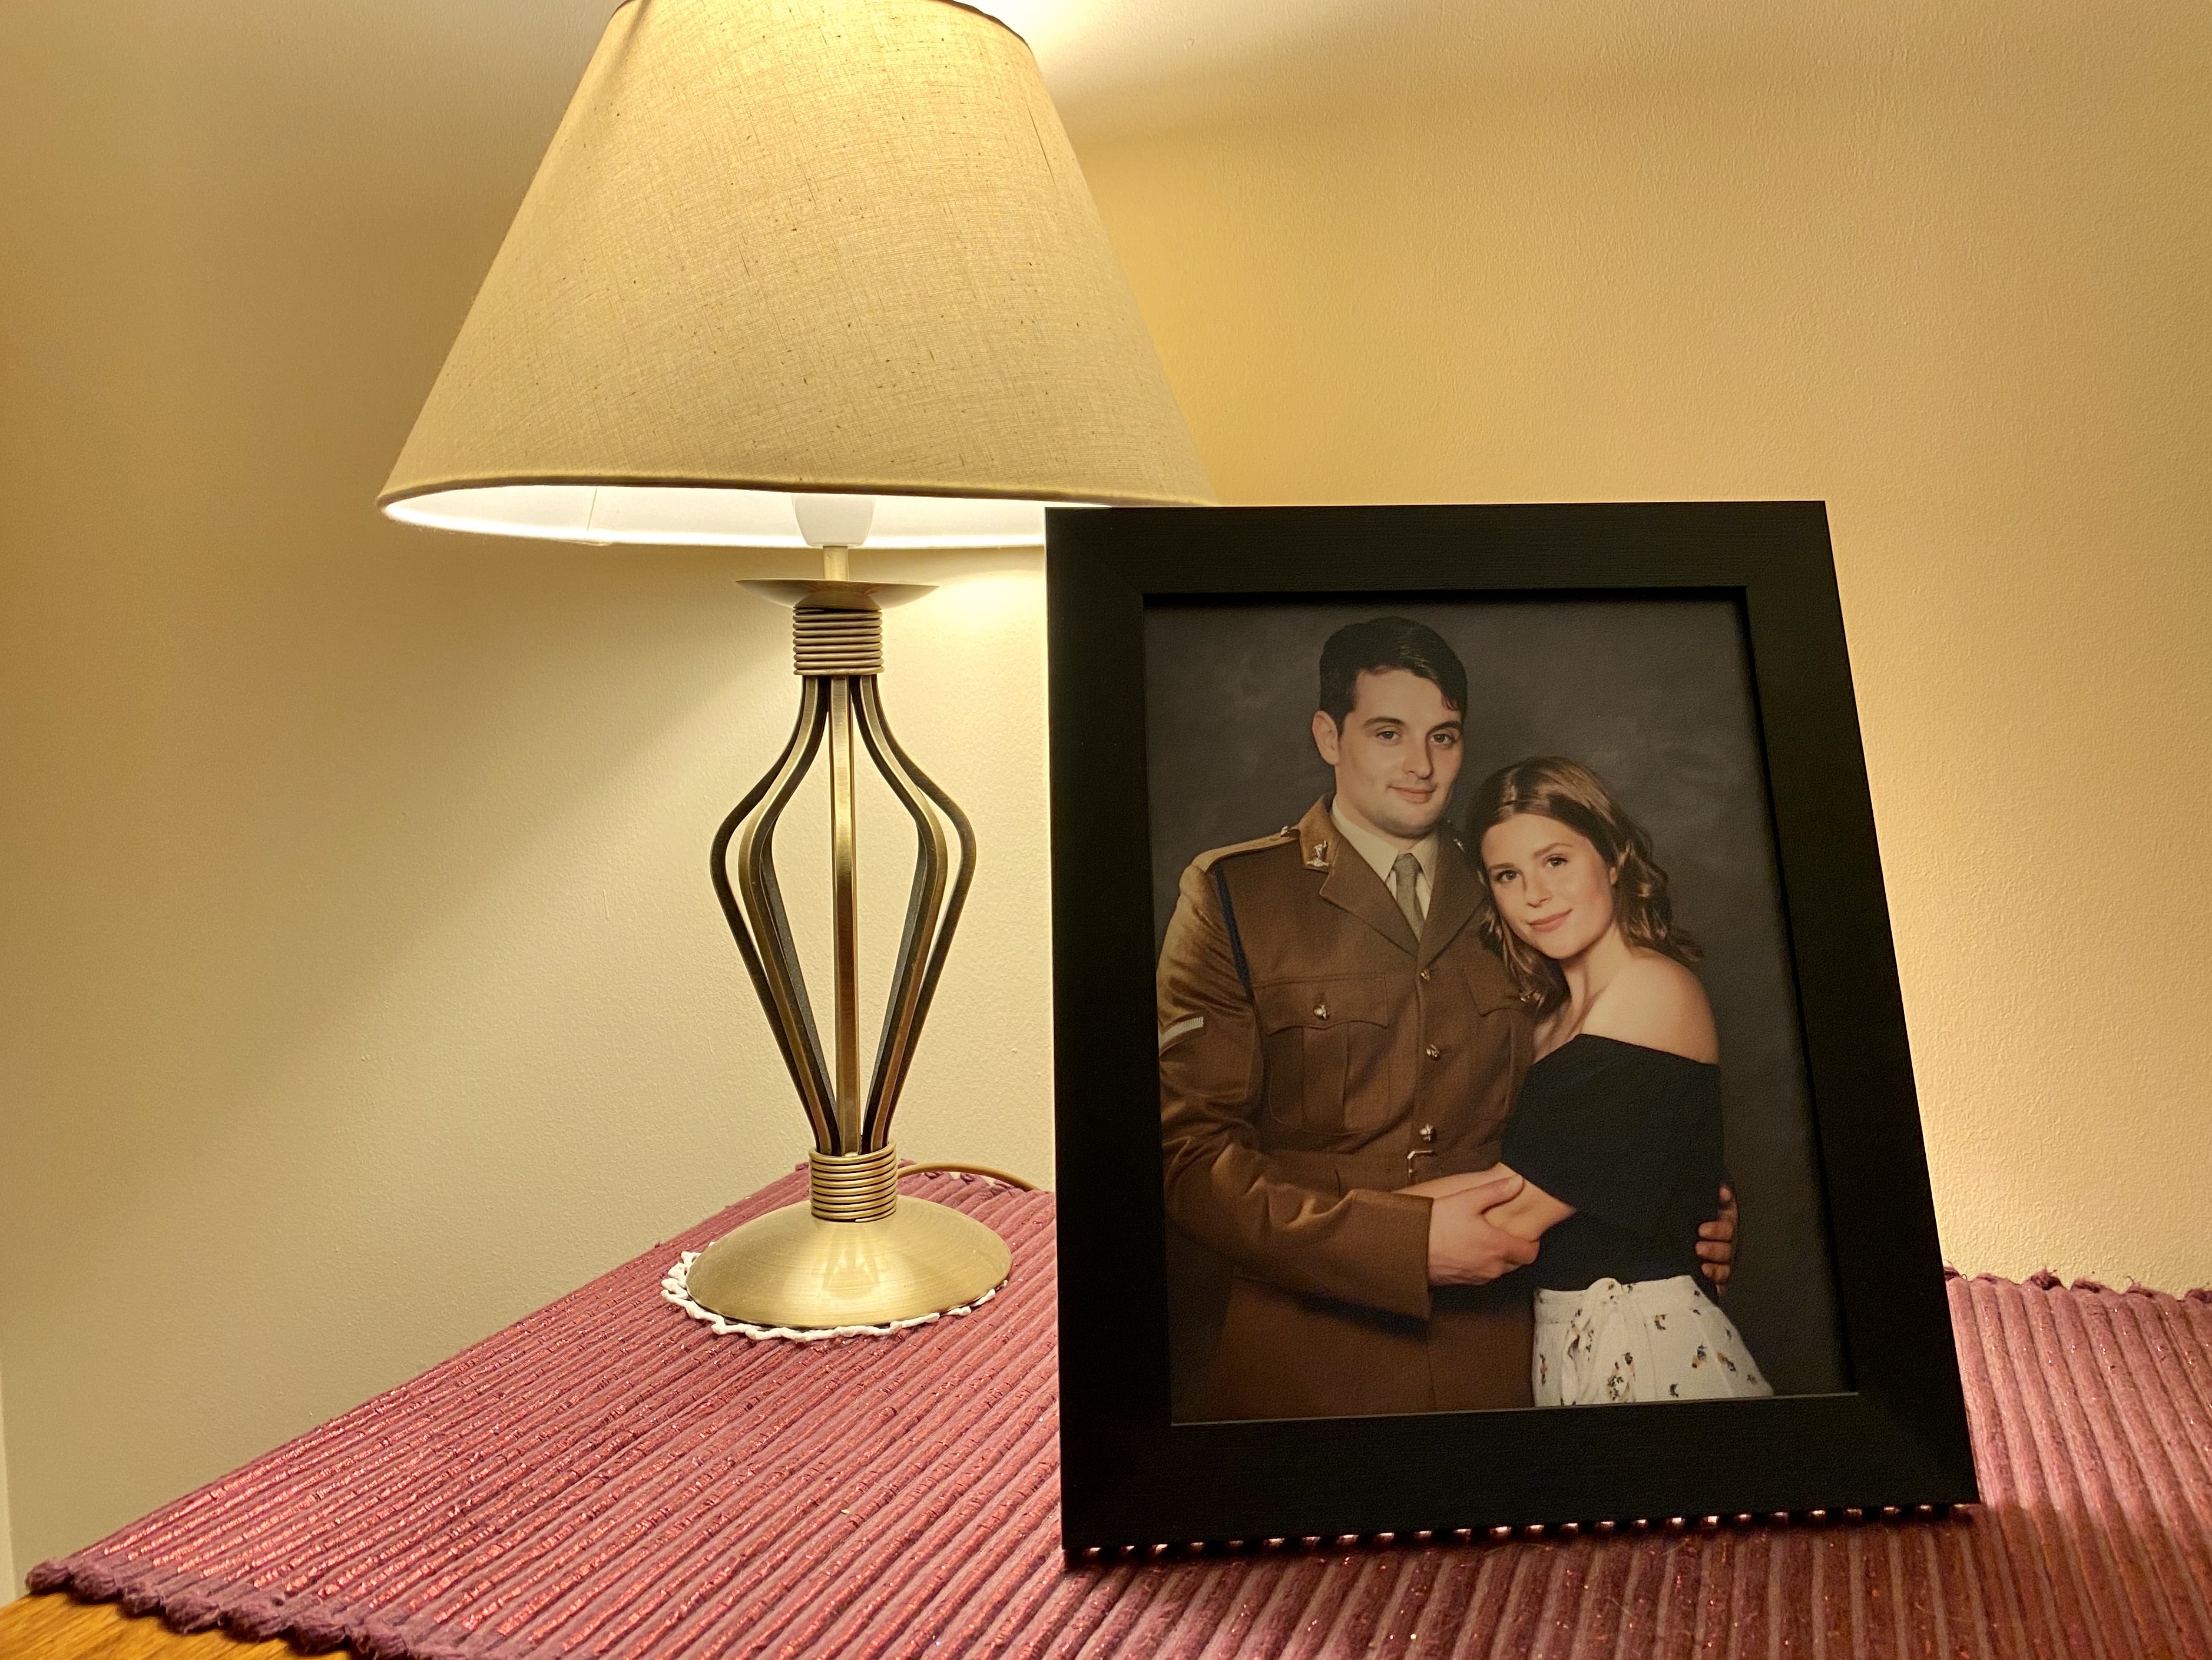 A framed image of a young man in army uniform, with a young woman next to him. They have their arms round each other and they look to the camera.